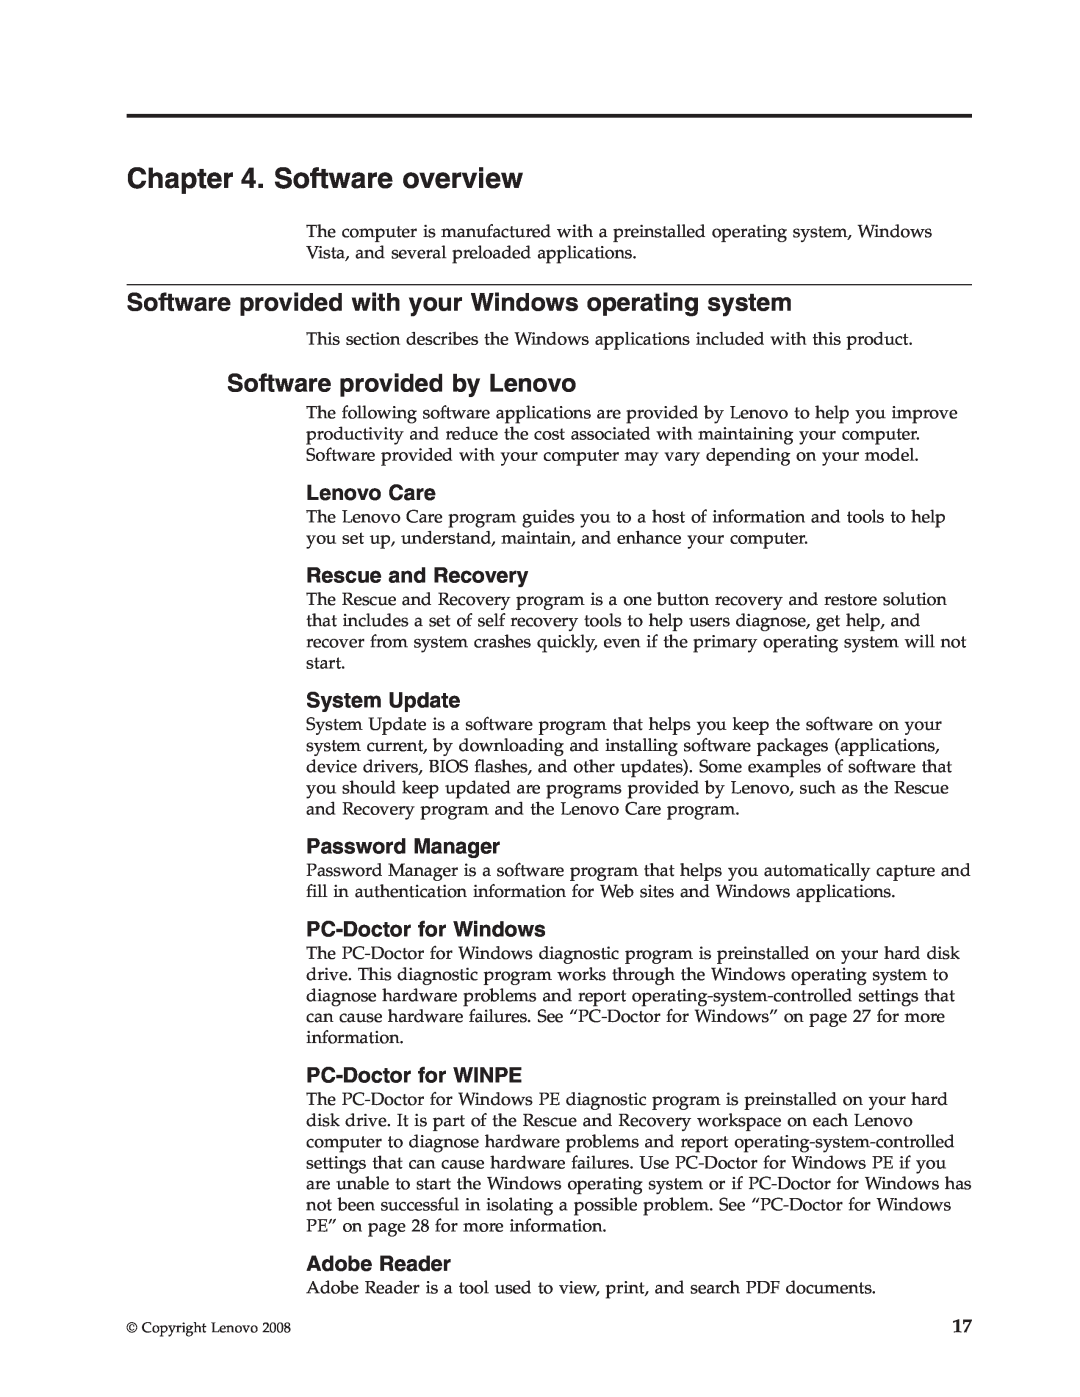 Lenovo 6306 manual Software overview, Software provided by Lenovo 